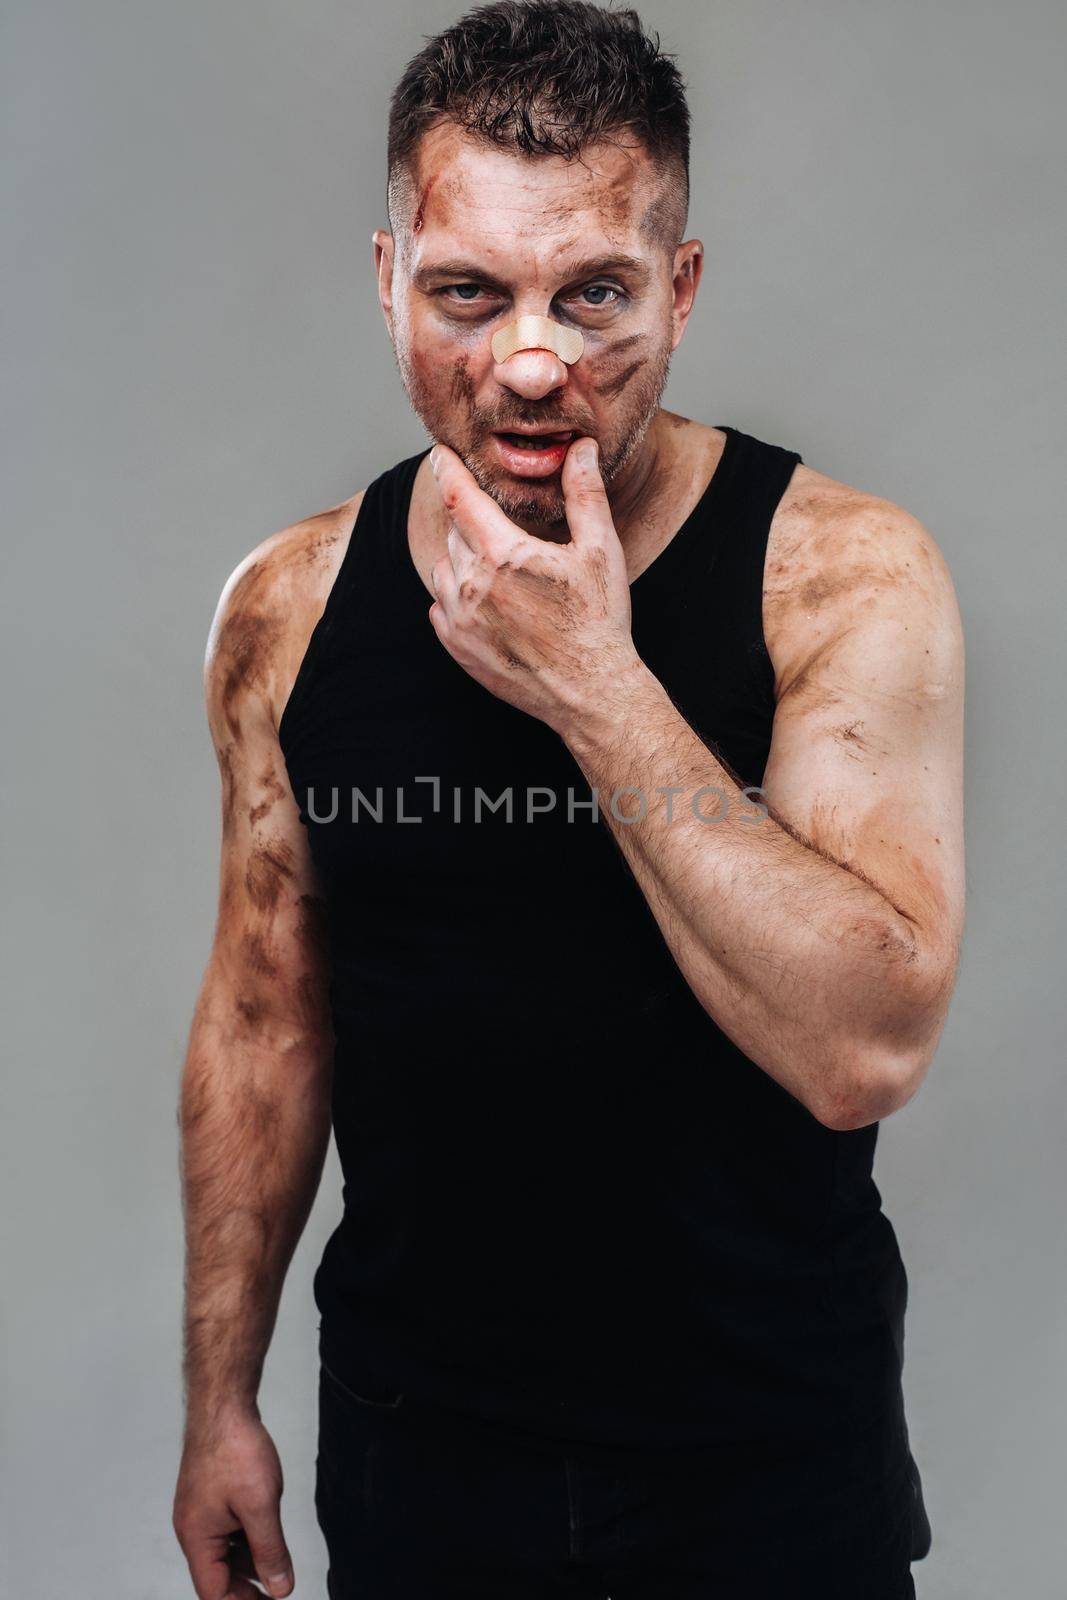 a battered man in a black T shirt who looks like a drug addict and a drunk stands against a gray background by Lobachad